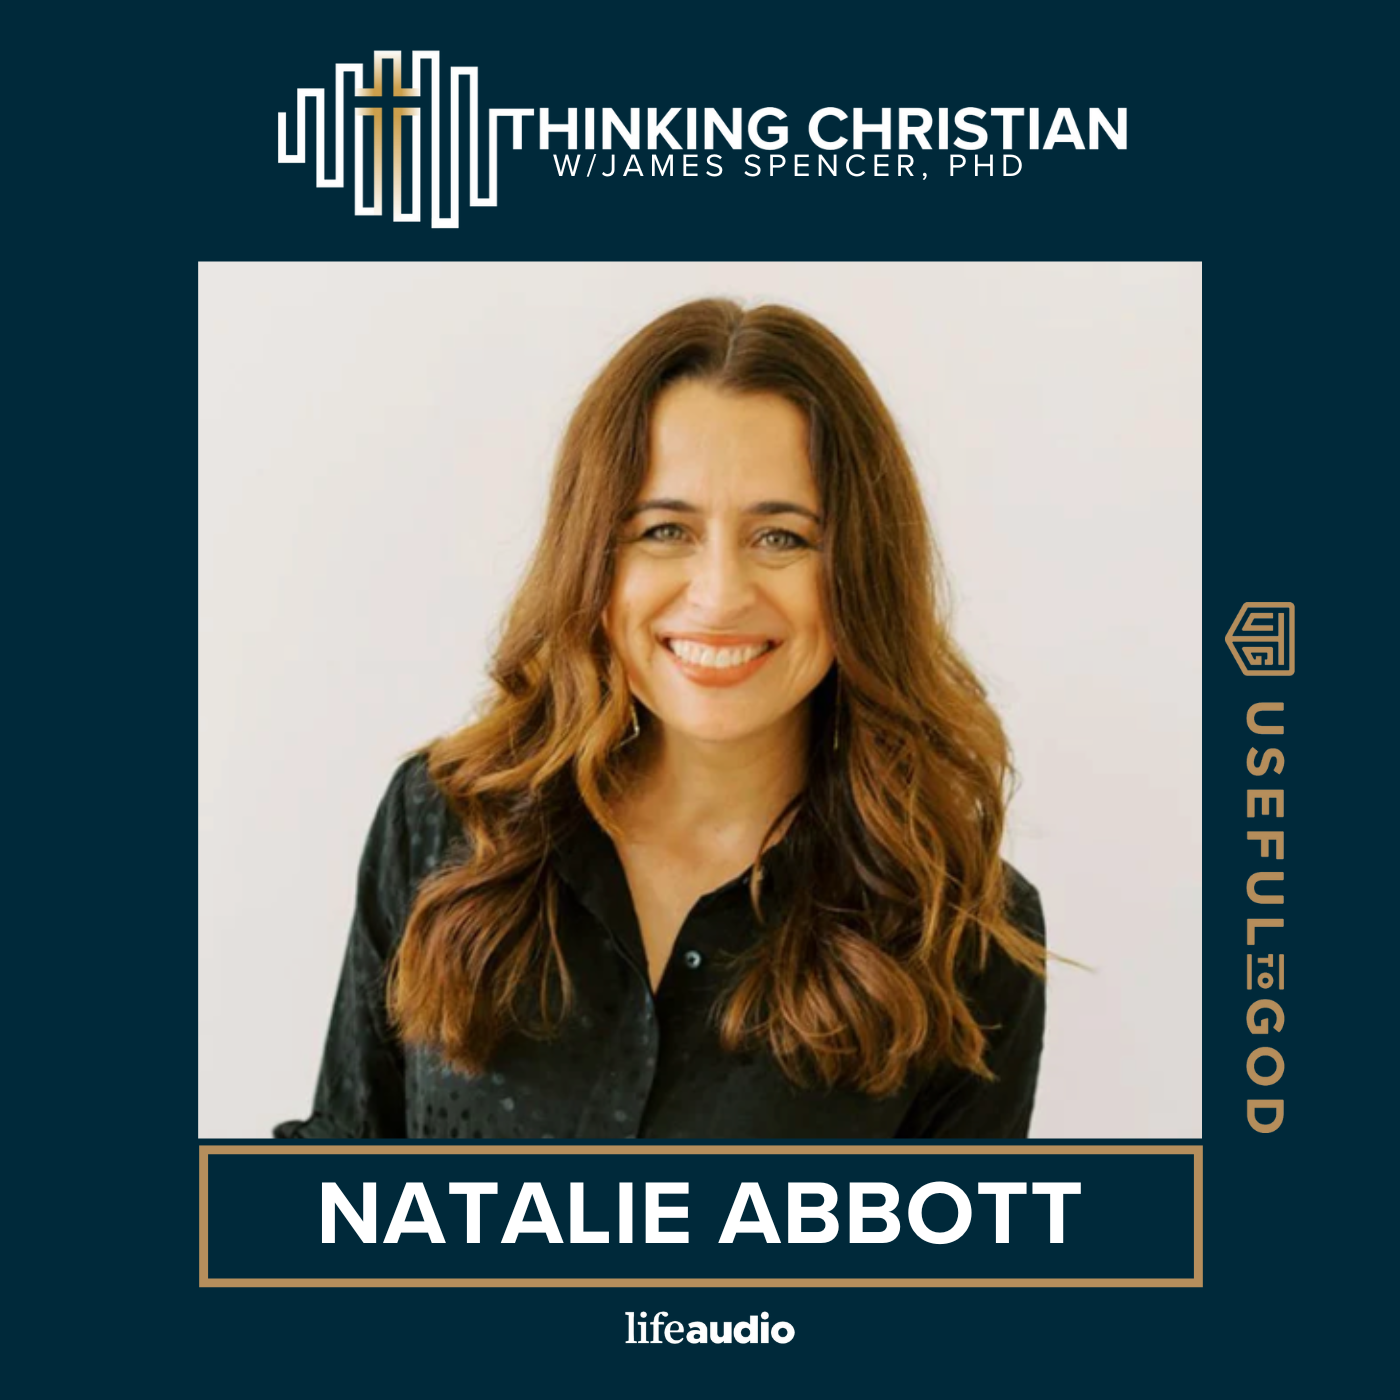 A Fresh Way to Memorize Scripture: A Conversation with Natalie Abbott from Dwell Differently